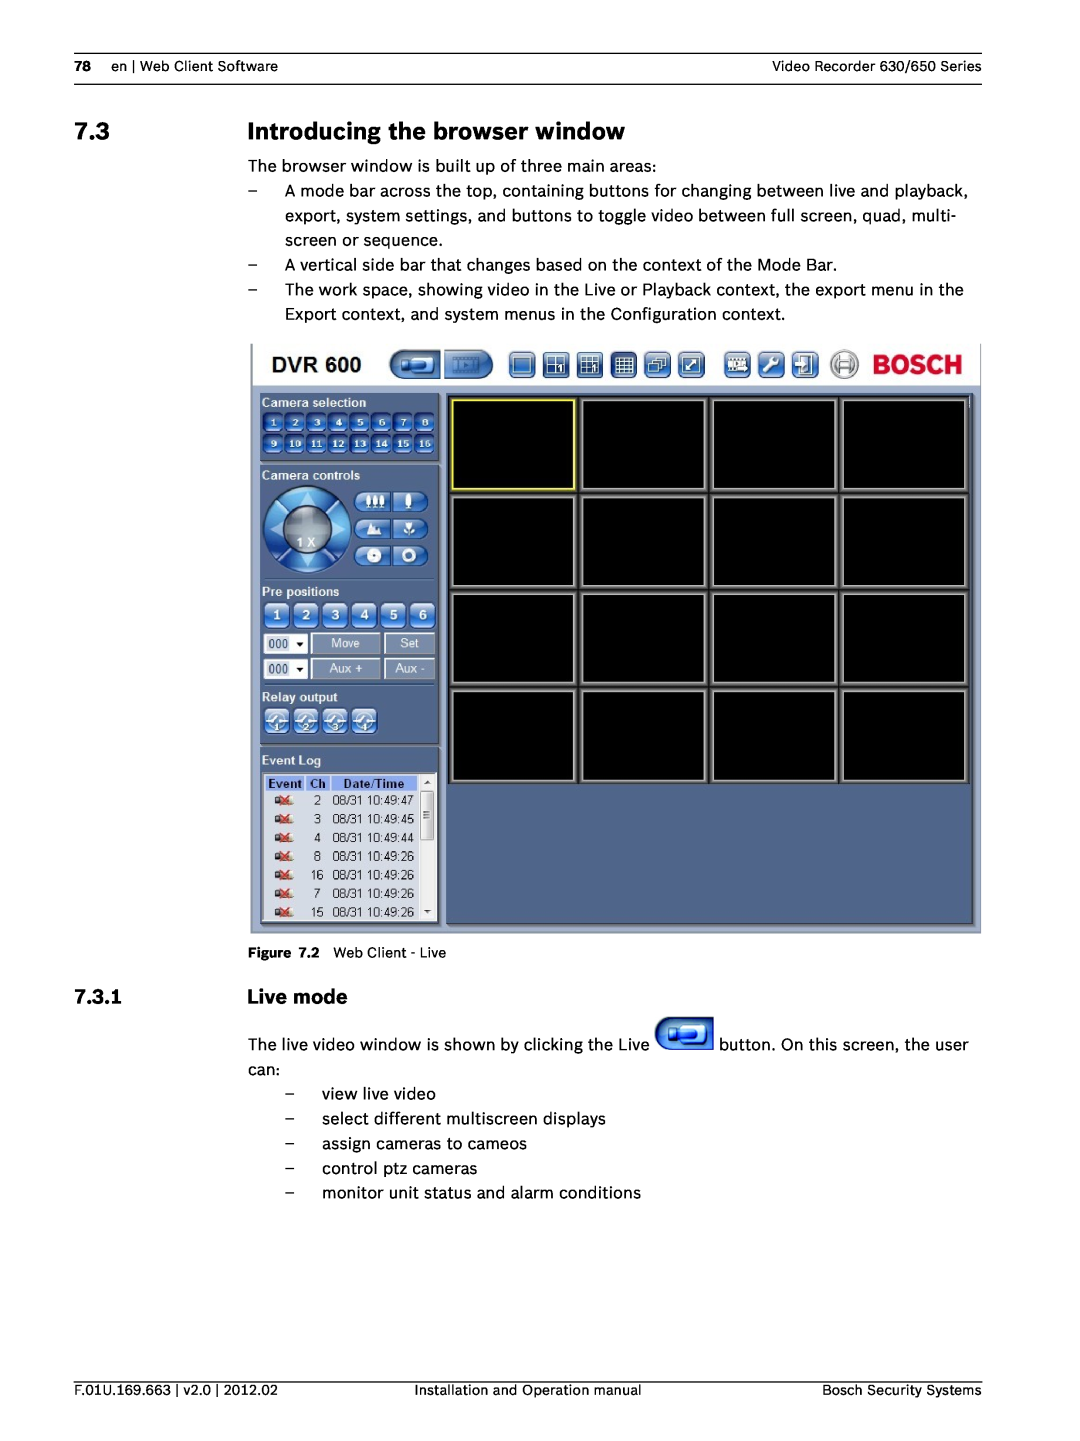 Bosch Appliances 650, 630 operation manual Introducing the browser window, 7.3.1, Live mode 